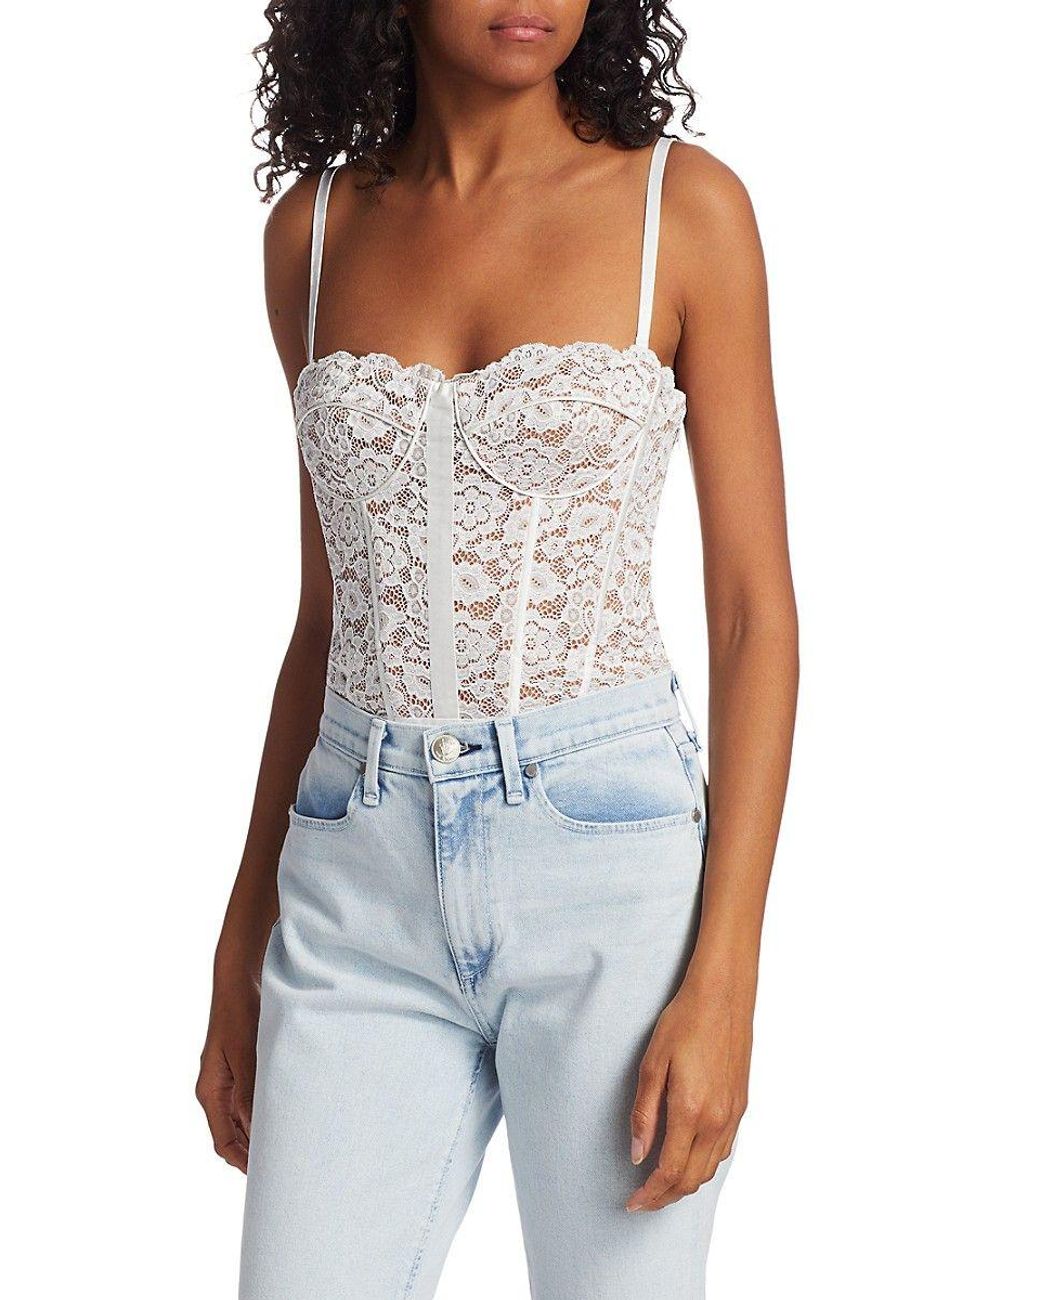 Cami NYC The Bria Lace Bodysuit in Blue